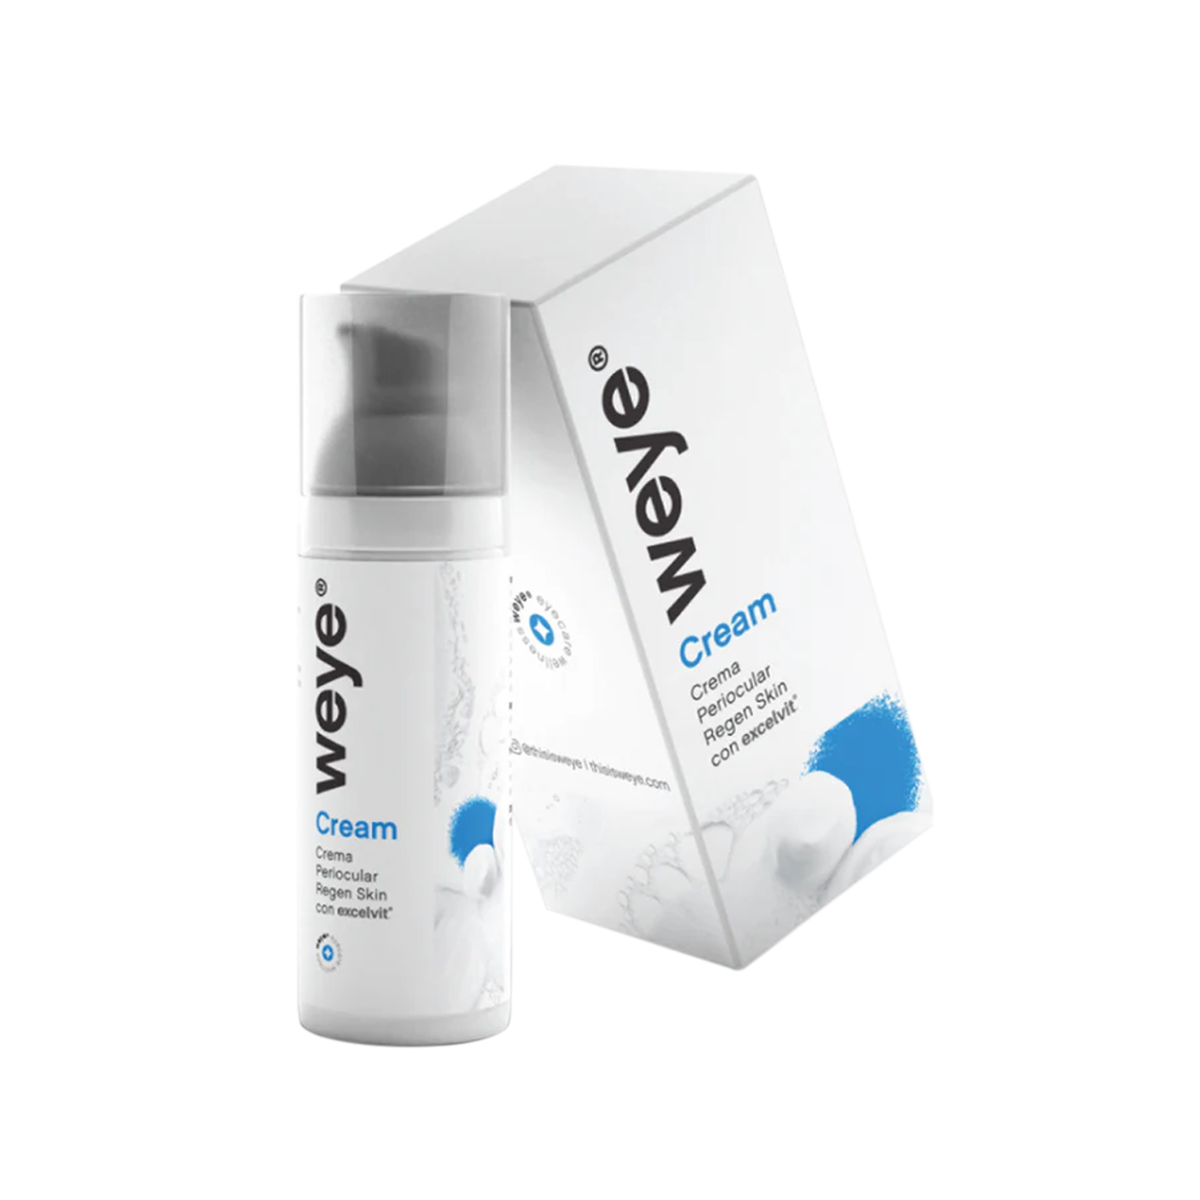 Weye Eye and Facial Cream with Excelvit (50mL)